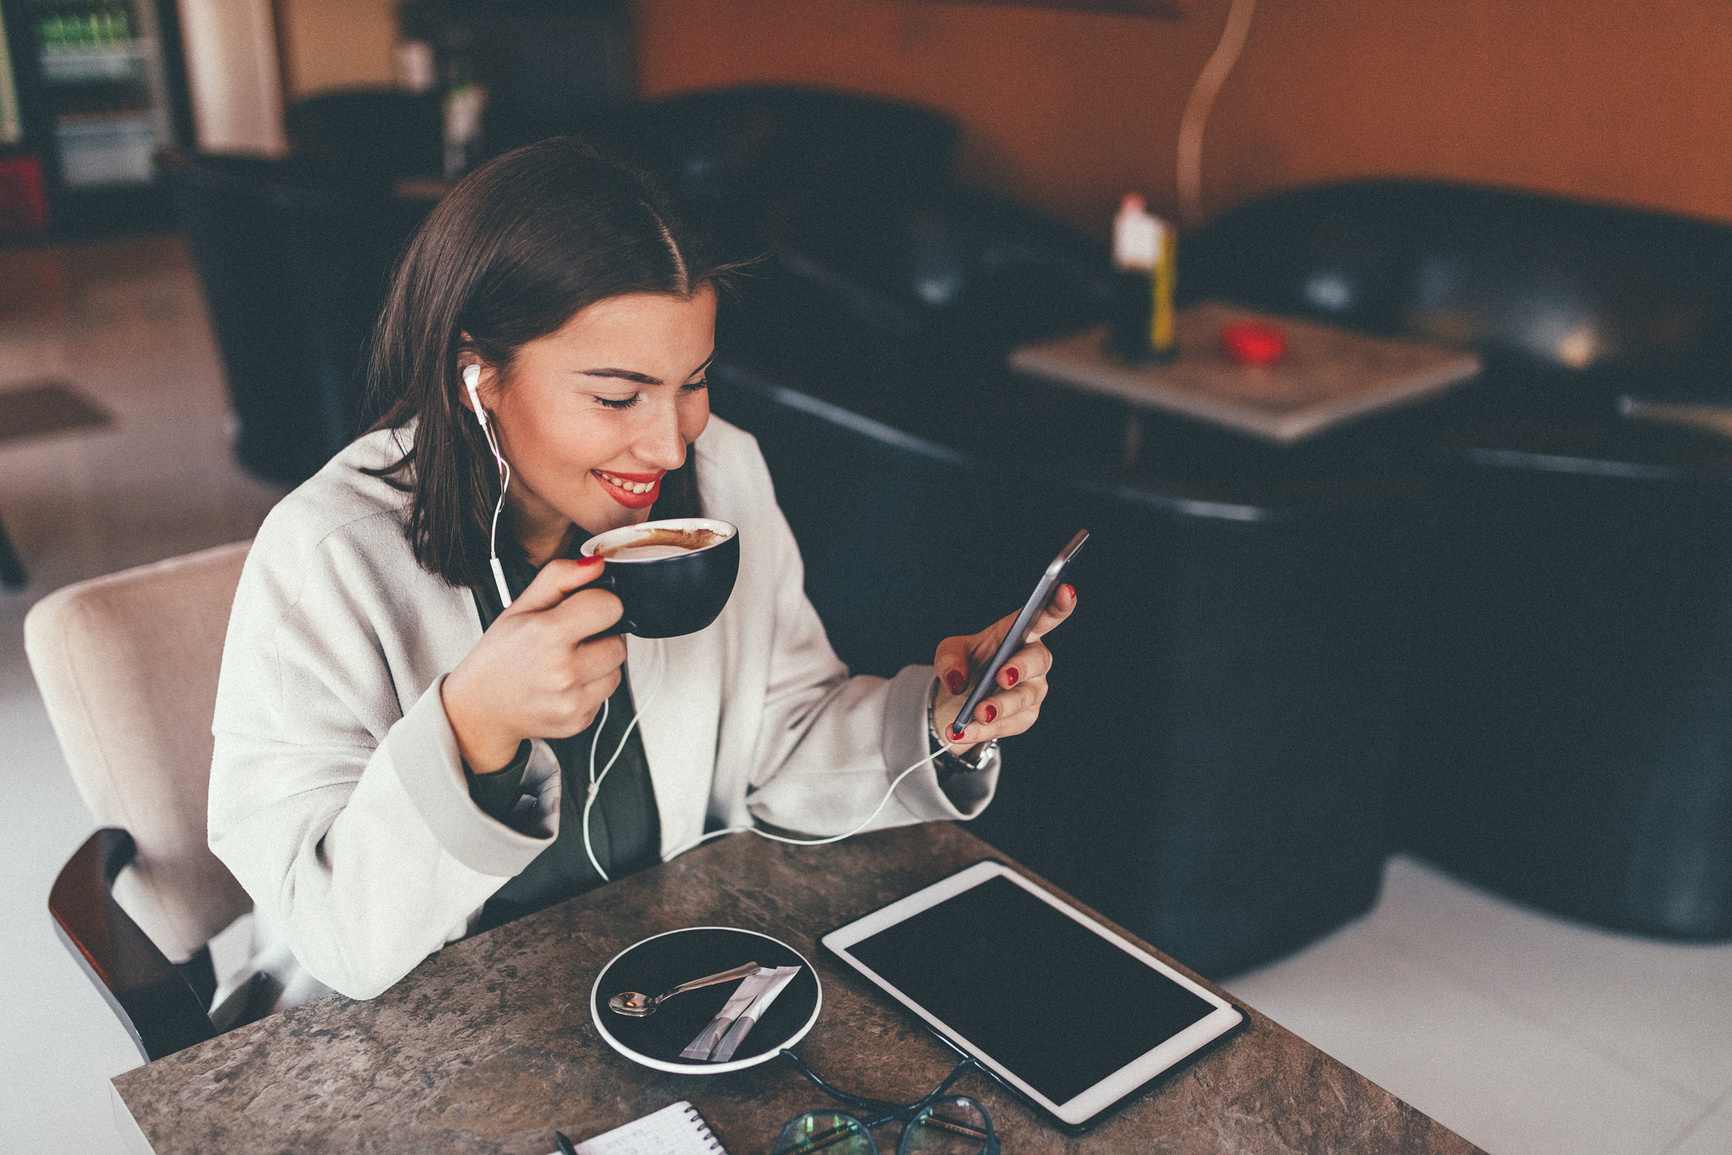 Staying in touch while staying caffeinated